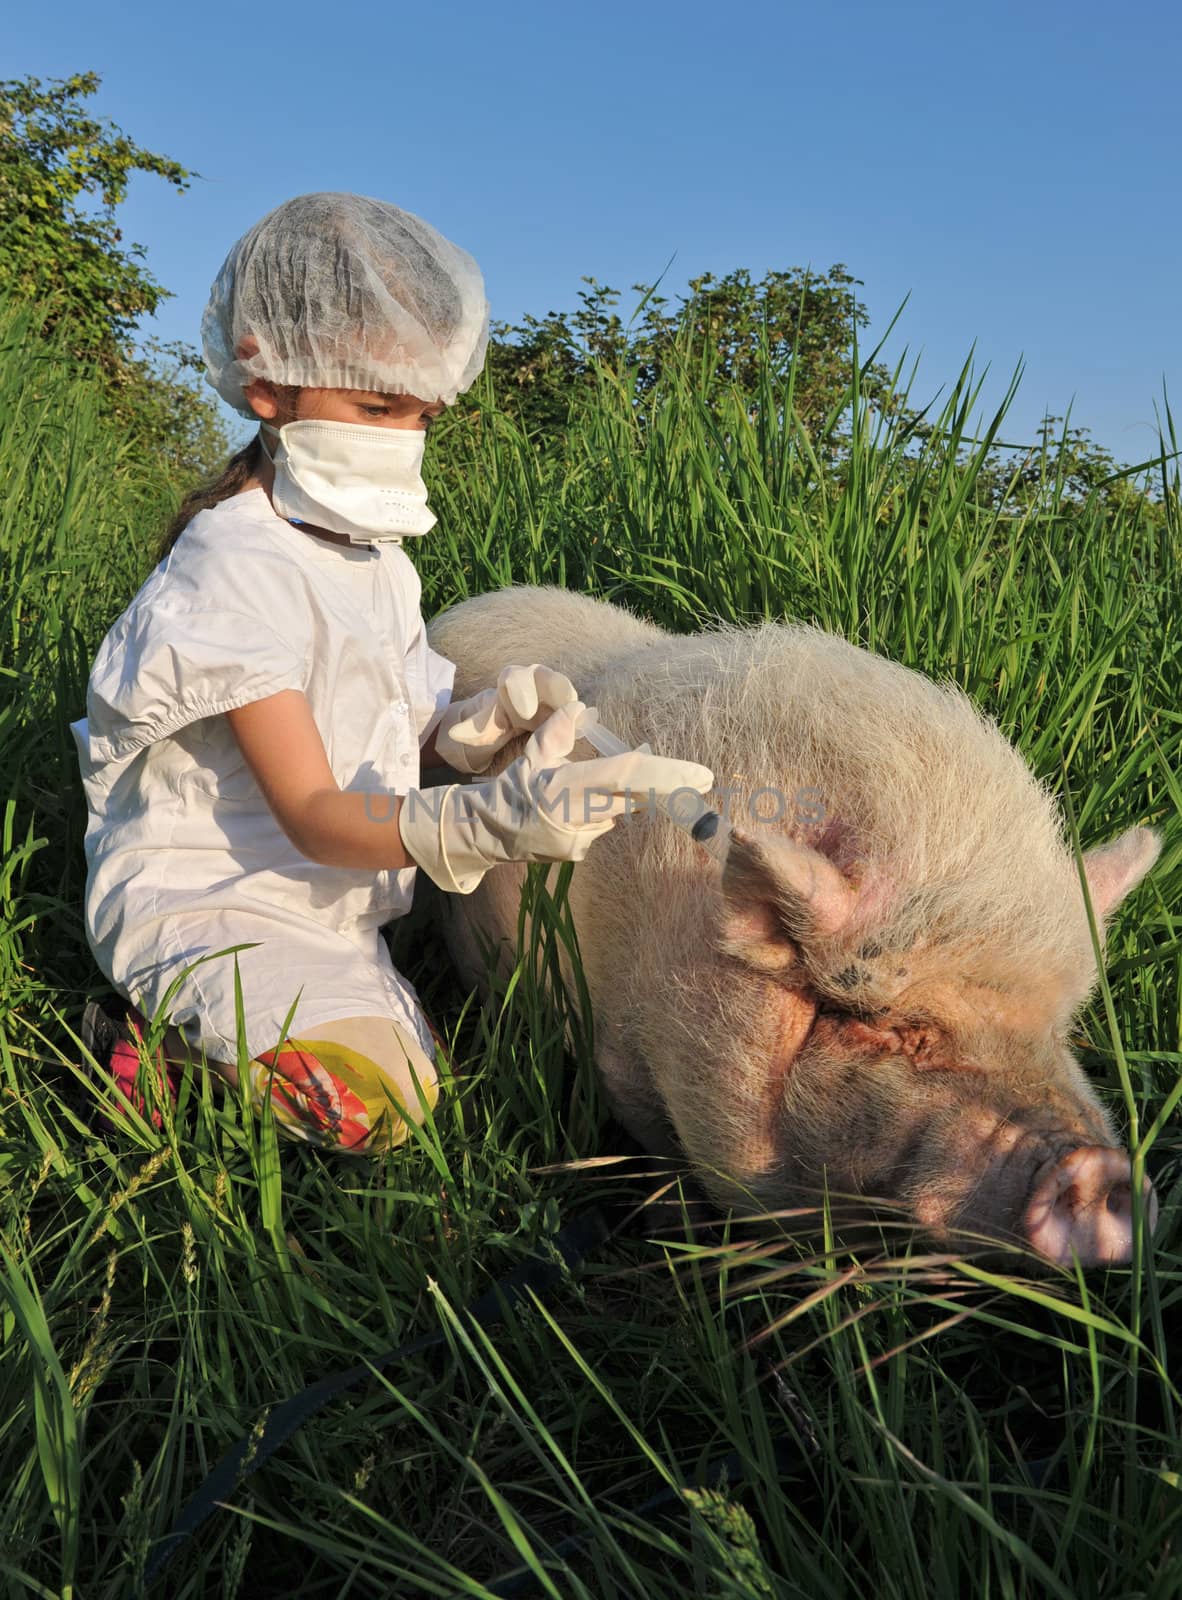 child playing with a pig and risk th swine influenza flu